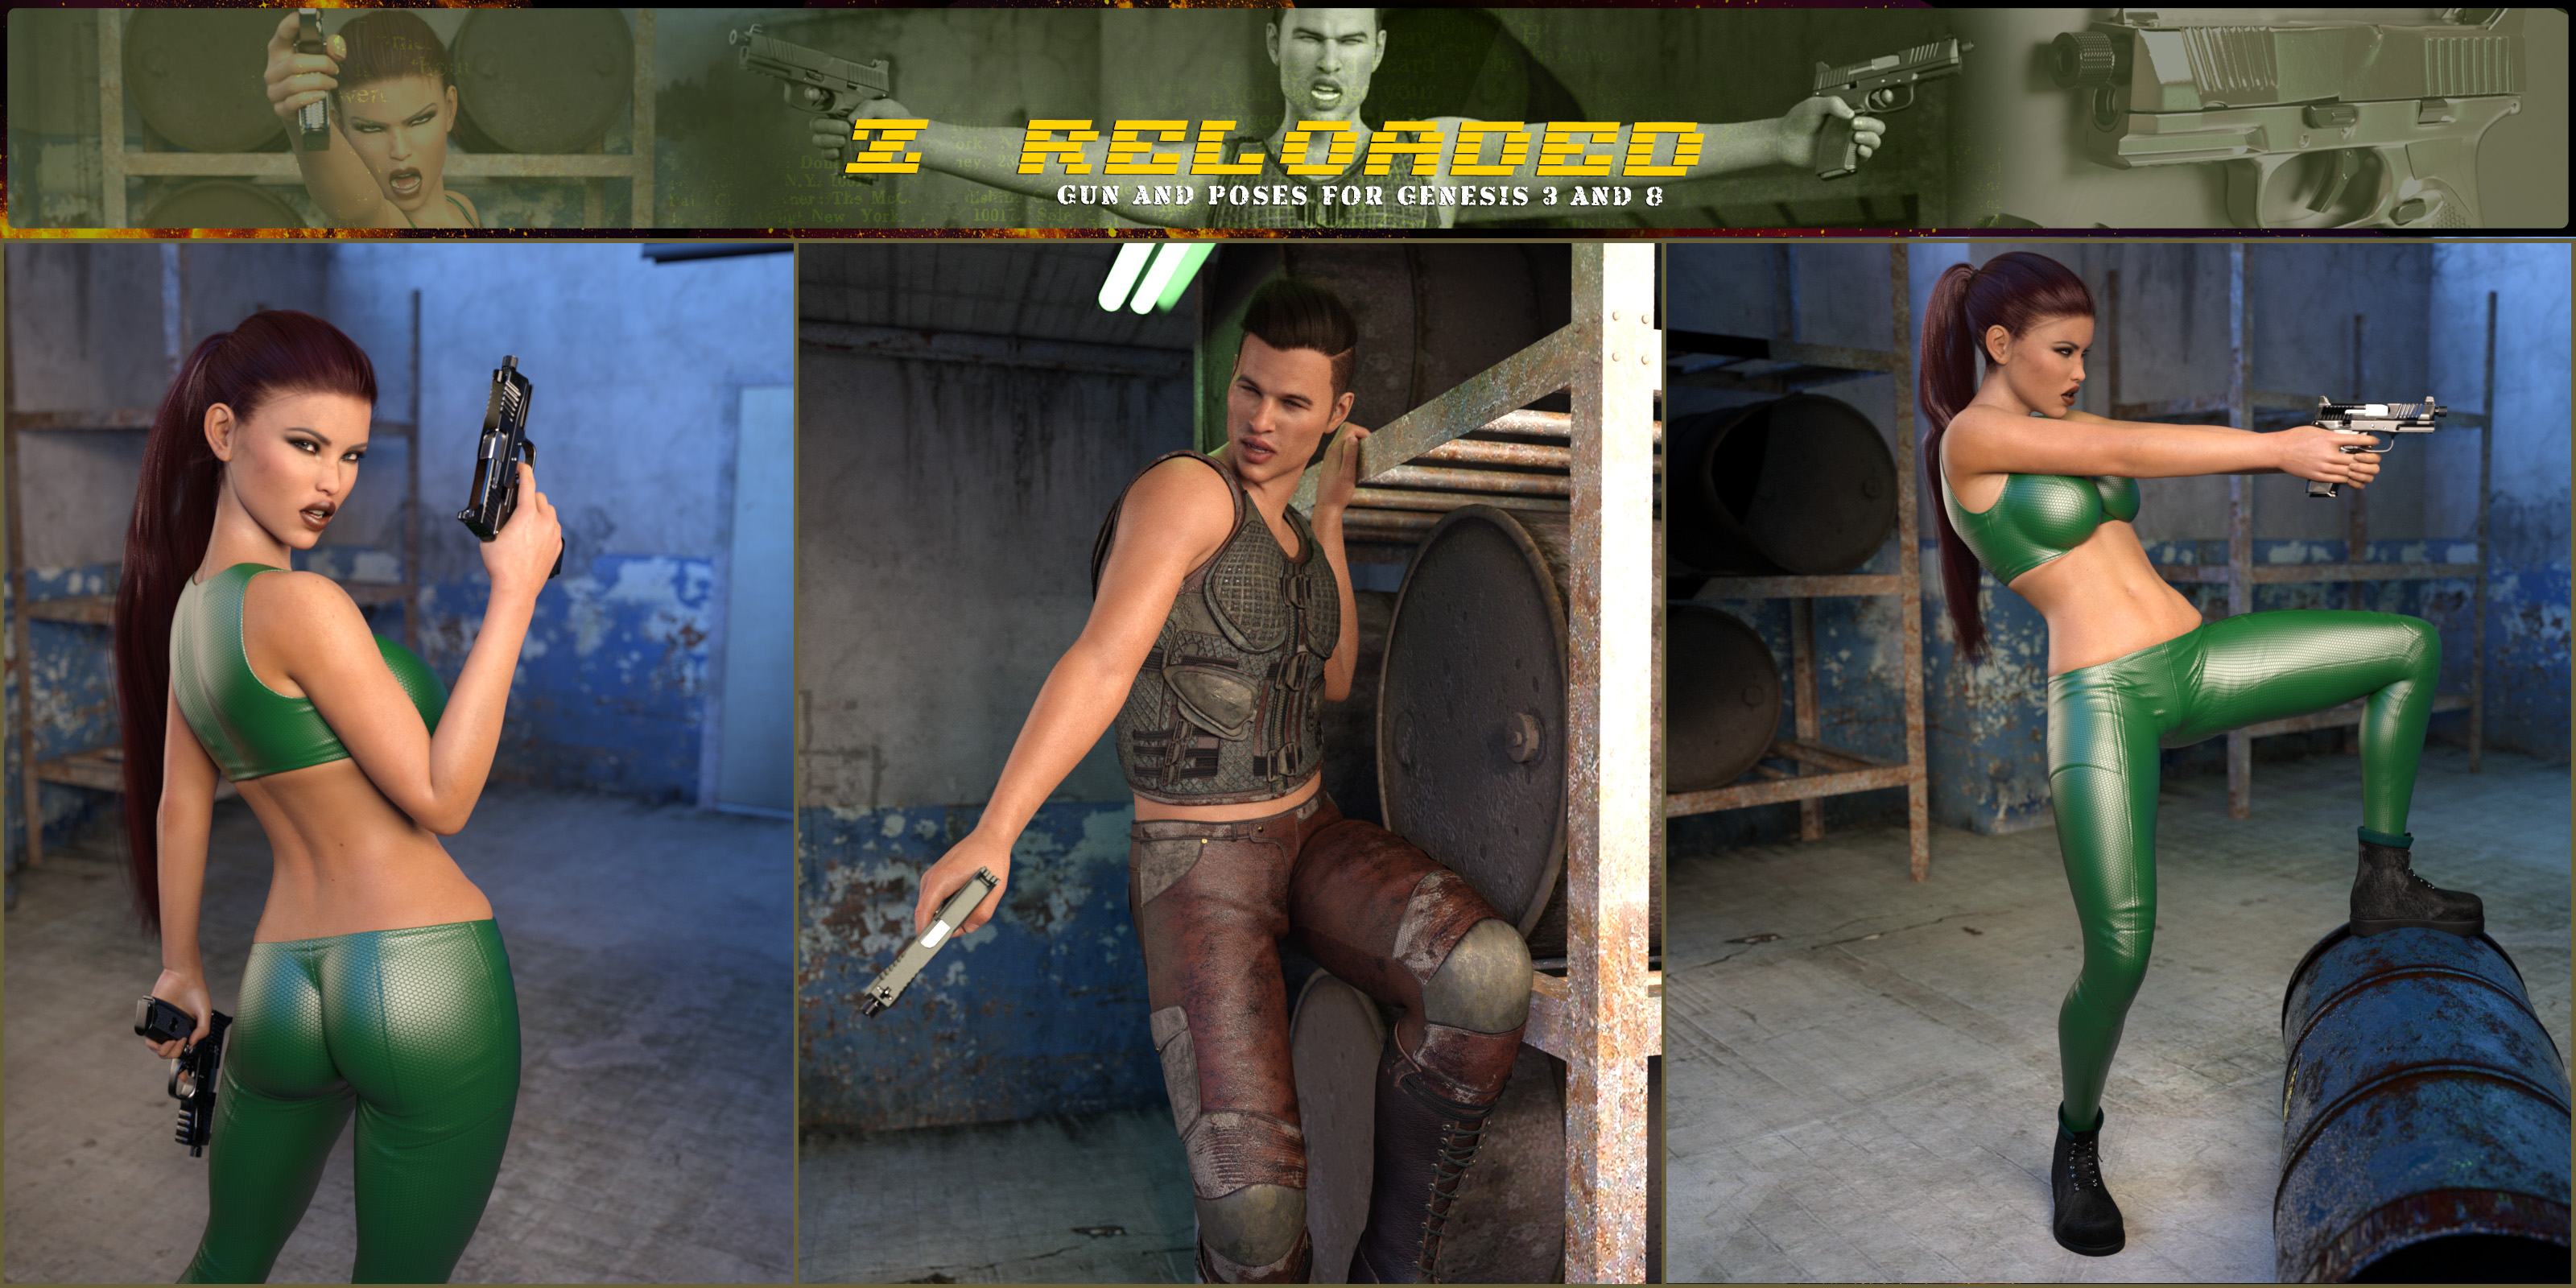 Z Reloaded Gun and Poses for Genesis 3 and 8 by: Zeddicuss, 3D Models by Daz 3D